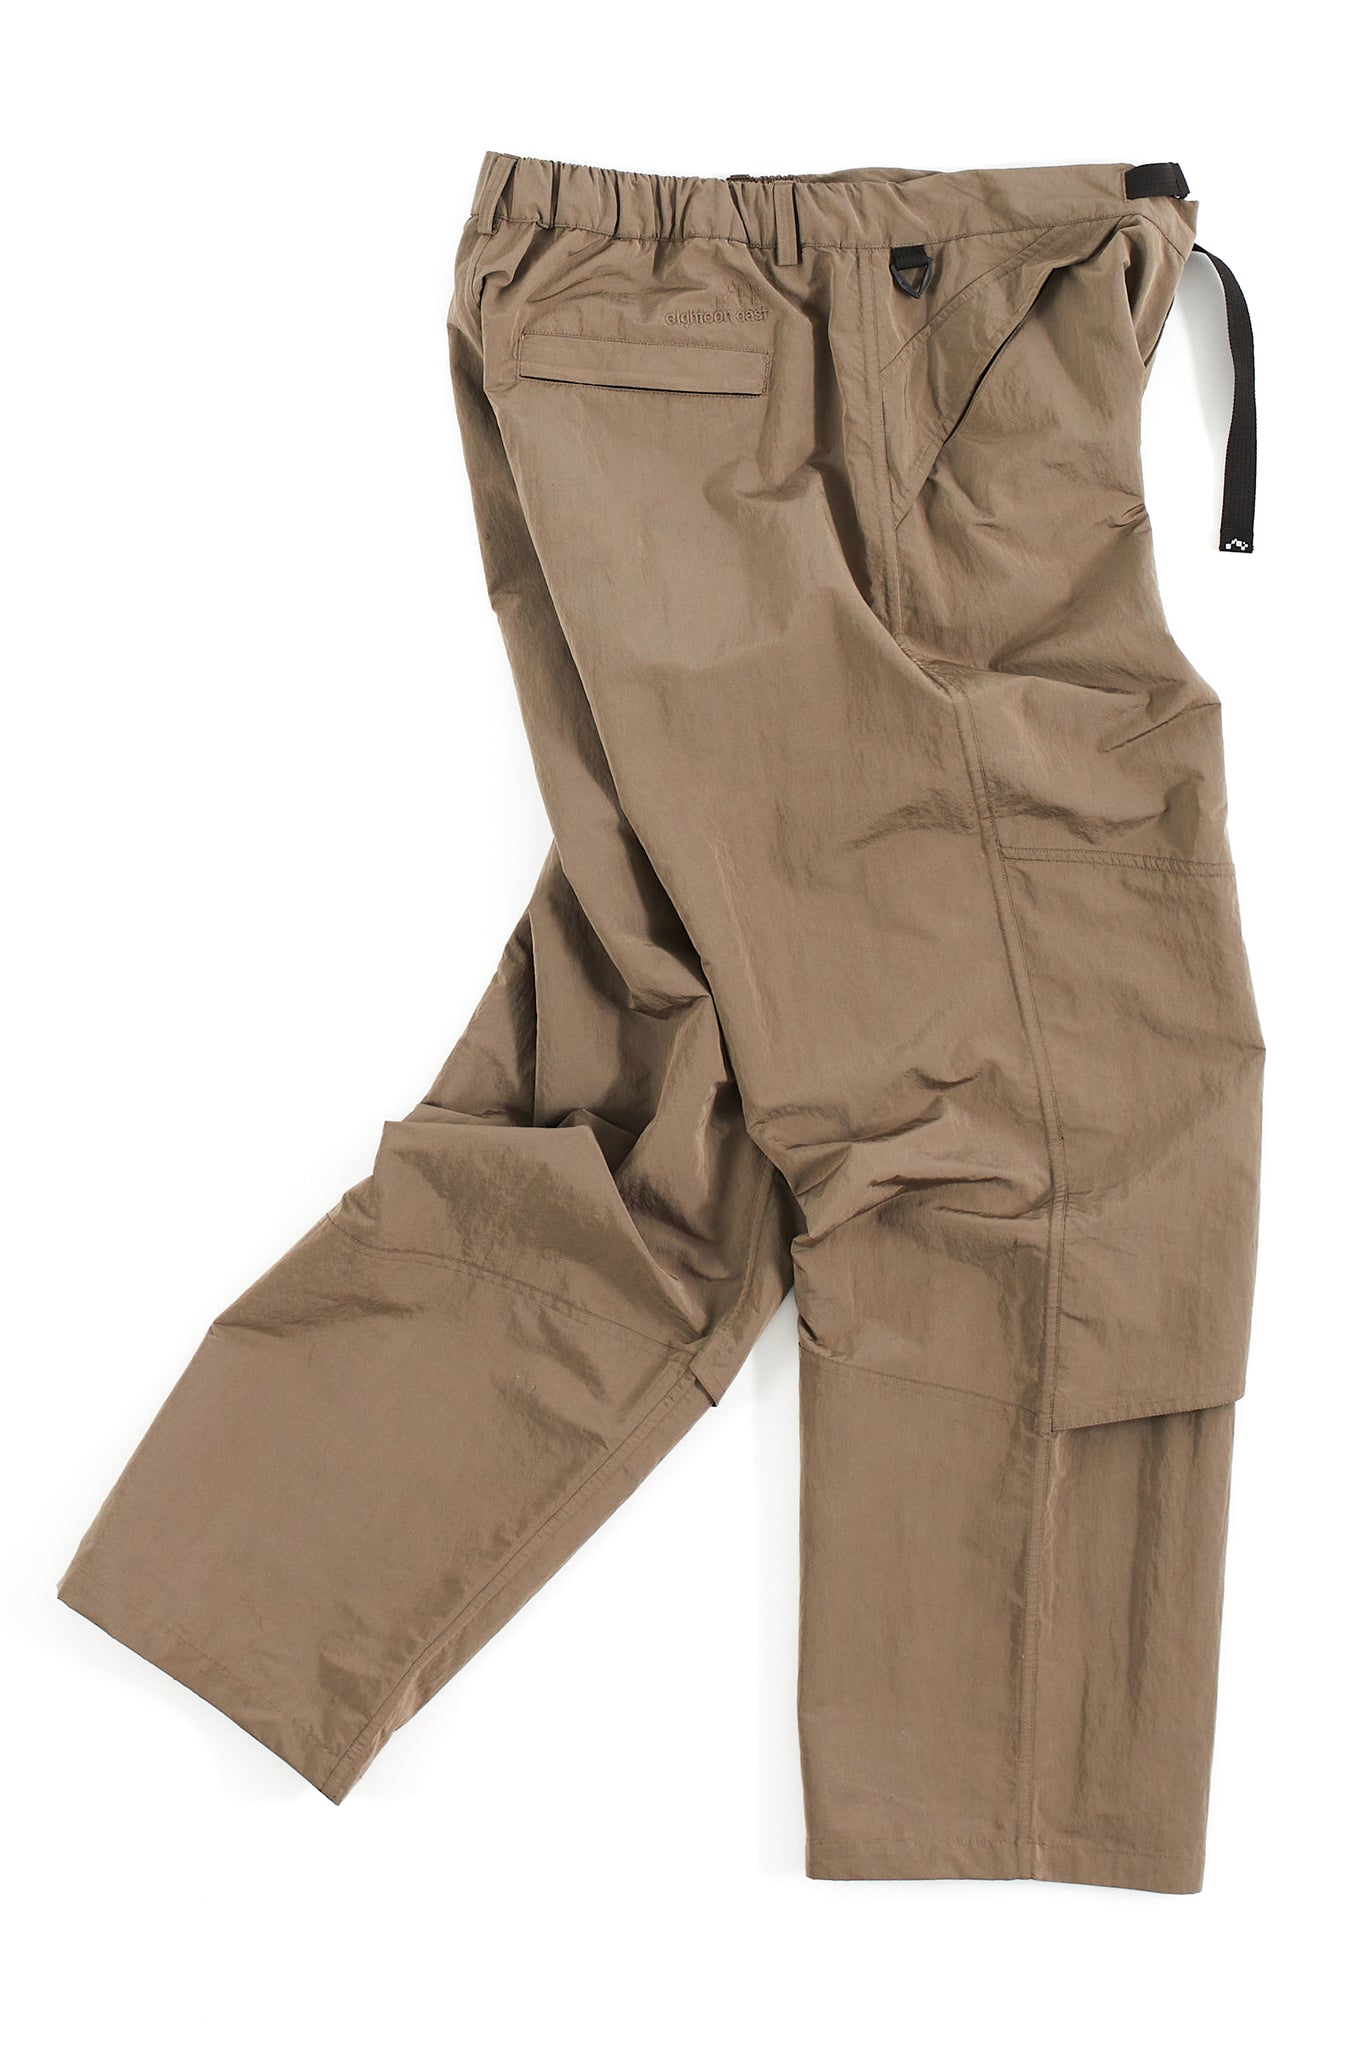 RAINSHADOW OUTDOOR PROTECTION SYSTEM TRAIL PANT - SILT WATER-REPELLENT MICRO RIPSTOP NYLON